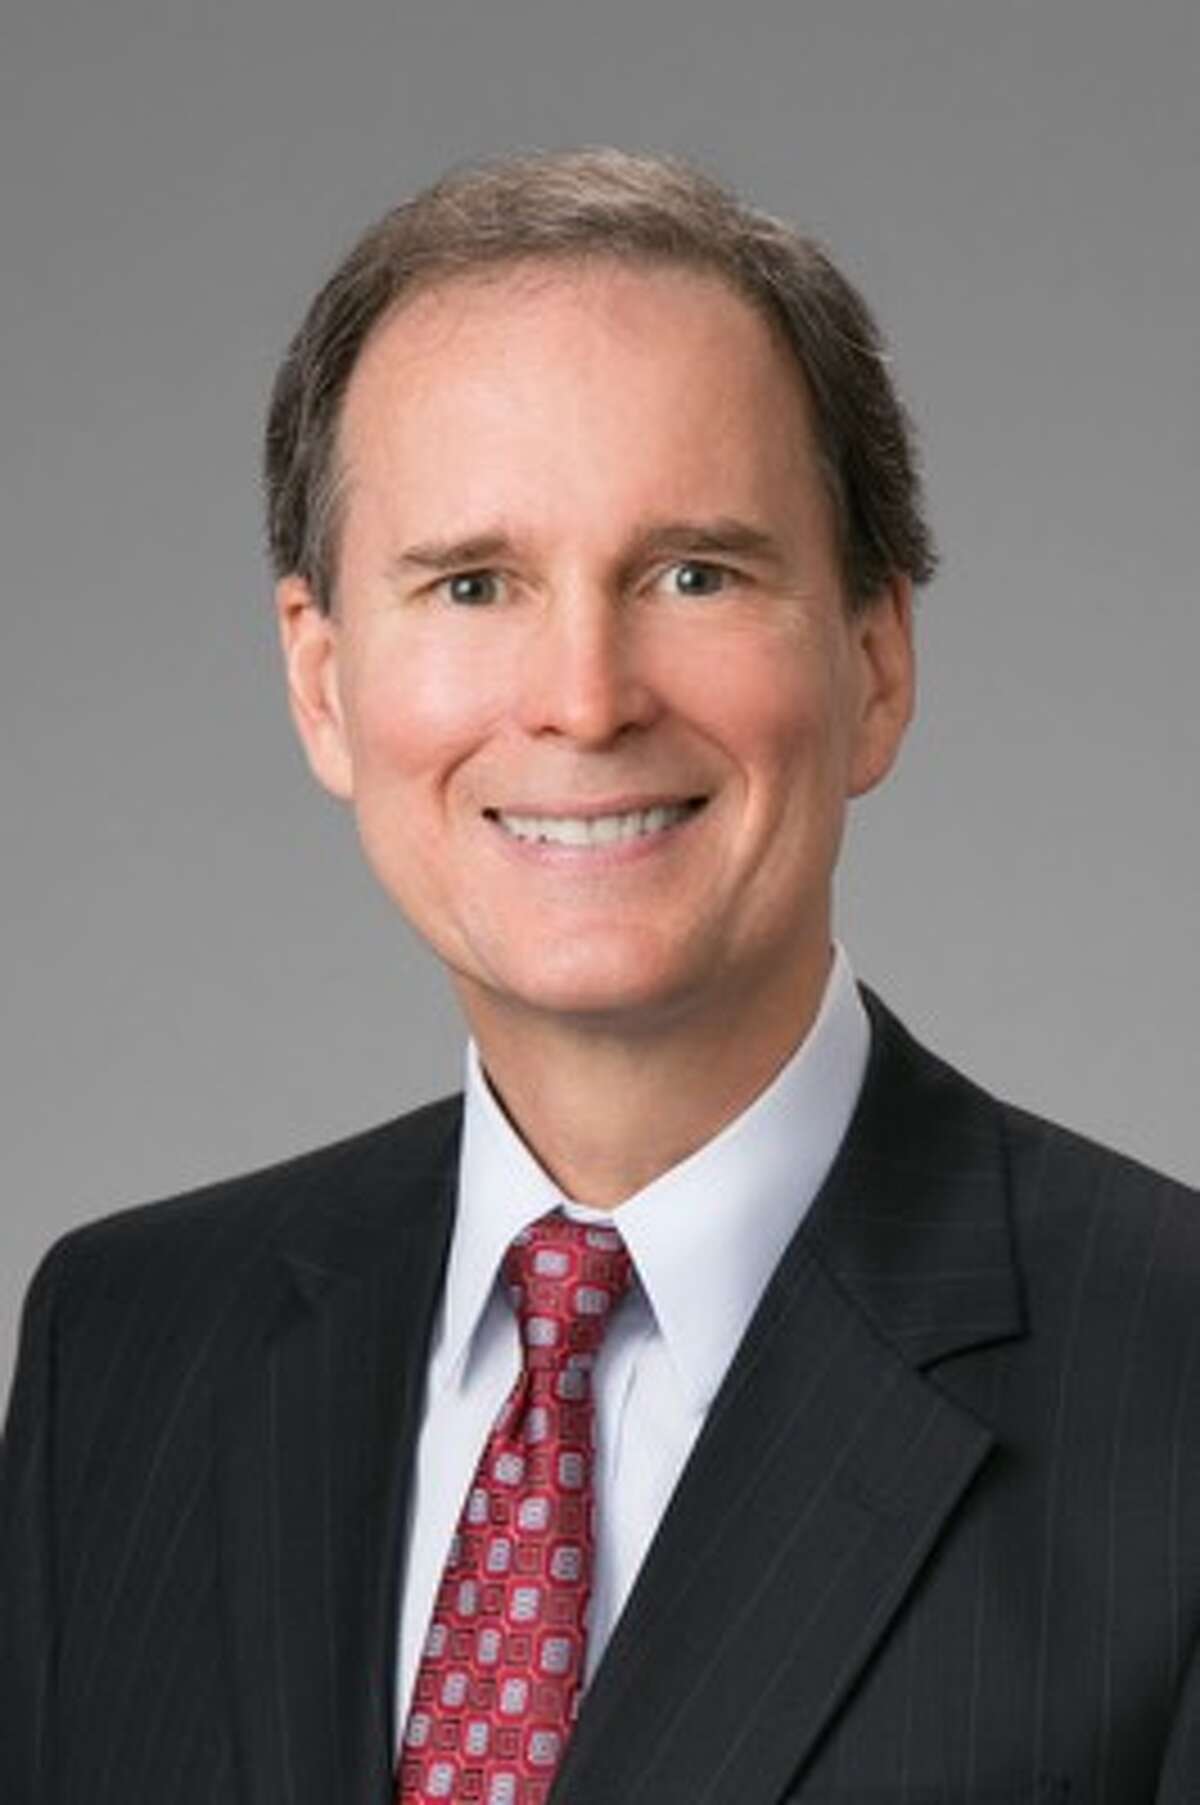 John Meredith has joined national law firm Chamberlain Hrdlicka as chief operating officer. He will manage more than 245 employees in the firmâs offices in Houston, Atlanta, Philadelphia and San Antonio. He will also oversee strategic planning and budget management for the firm, as well as business development, facilities and human resources management, recruitment and diversity, professional development, pro bono and other initiatives.